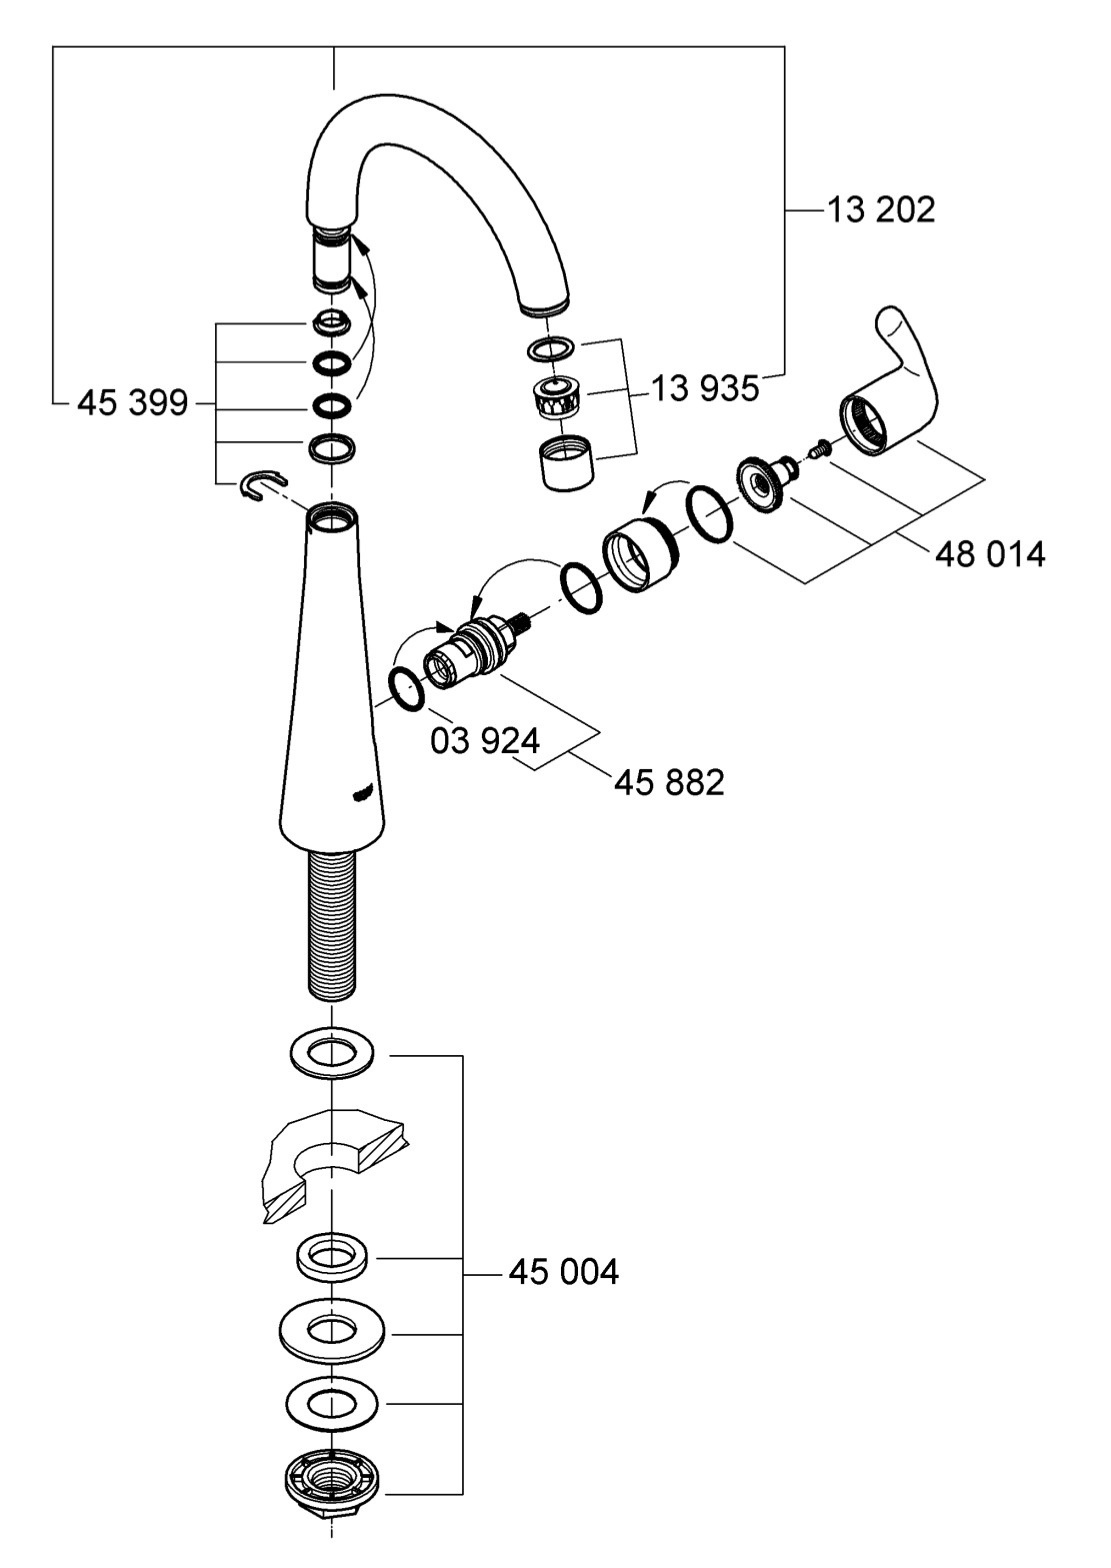 Grohe Shower Faucet Manual